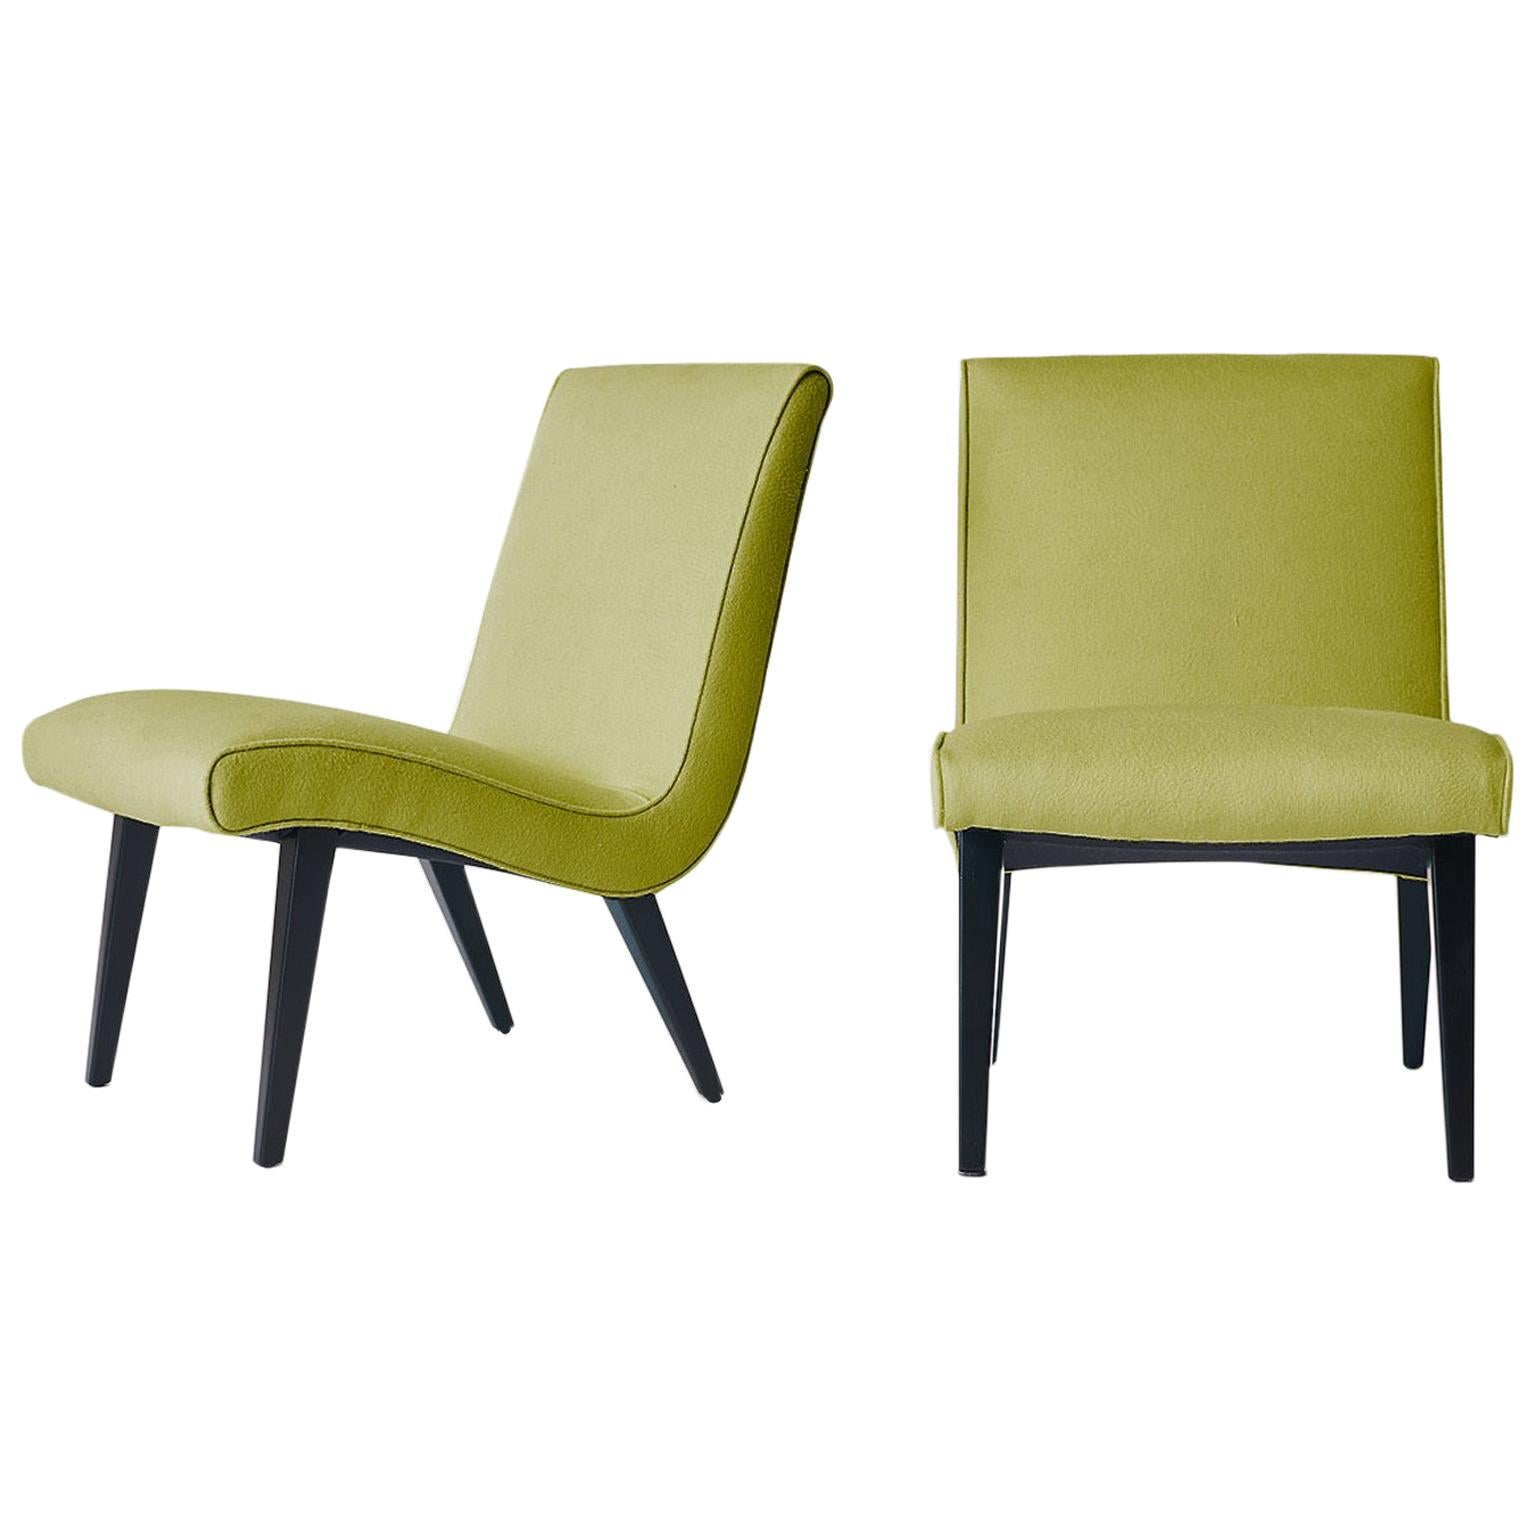 Pair of Jens Risom Scoop Chairs for Hans Knoll